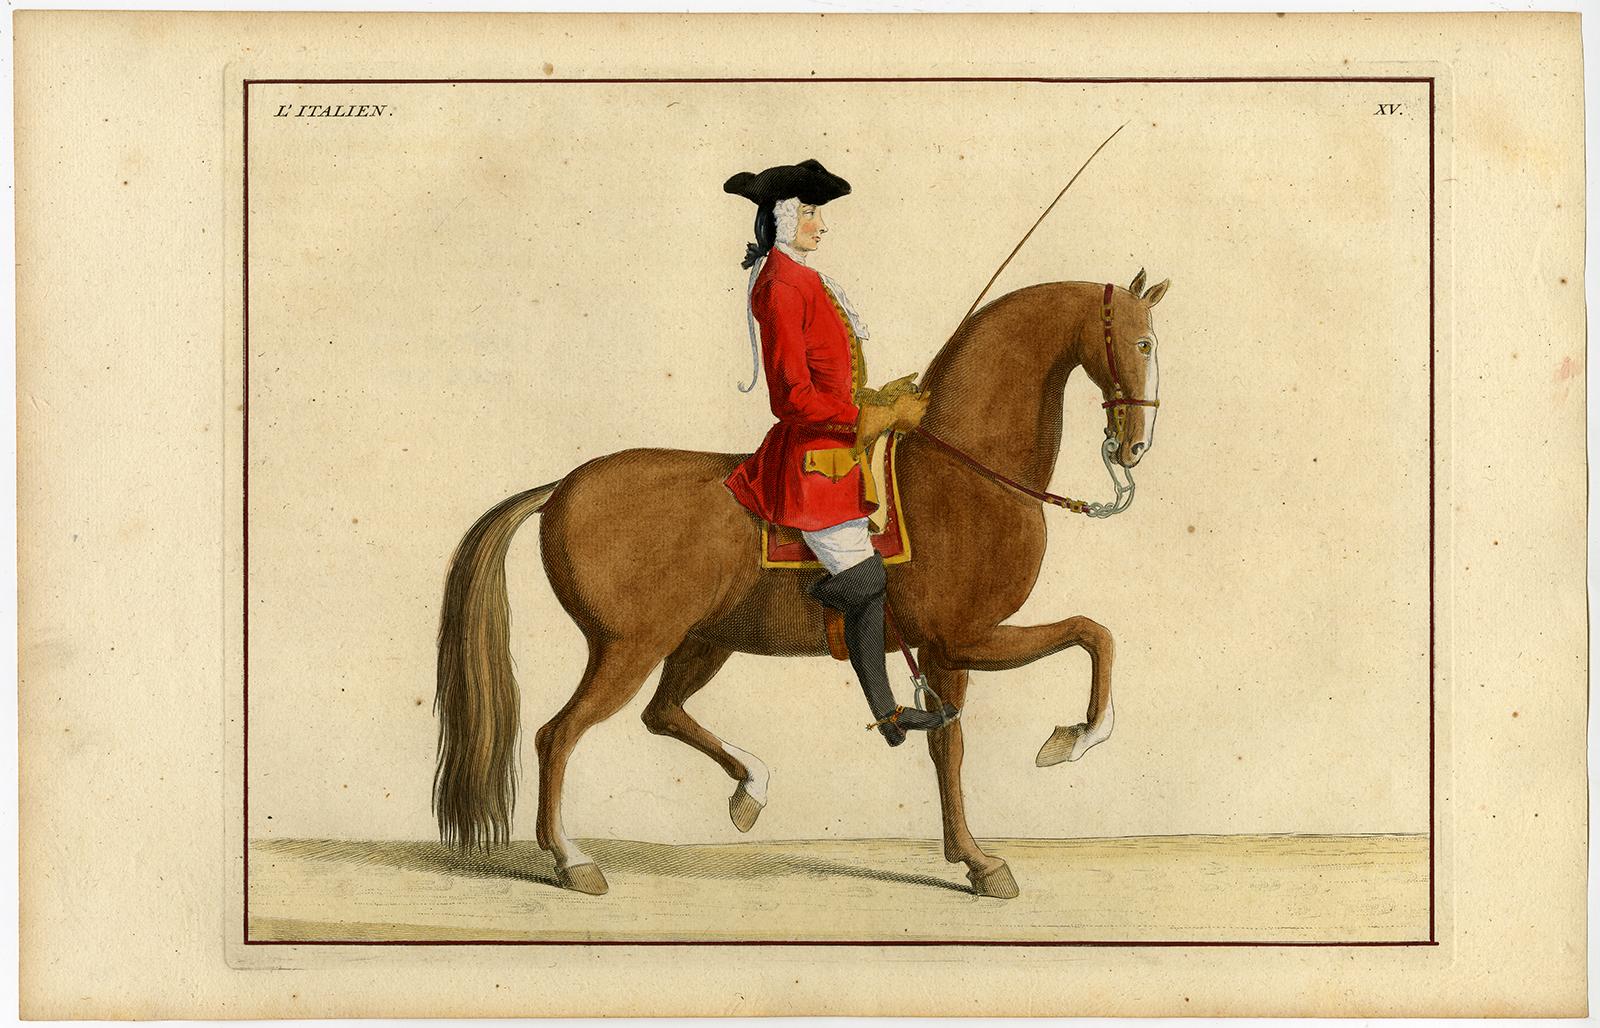 Set of 21 handcoloured etching/engraving on hand laid (verge type) paper:

Plate IX: MODESTY (Le Modeste)
Plate XV: ITALIAN (L'Italien)
Plate XVI: GENDARME (Le Gendarme)
Plate XVII: GENERAL (Le General)
Plate XIX: CHARM (Le Charme)
Plate XX: NOBLE